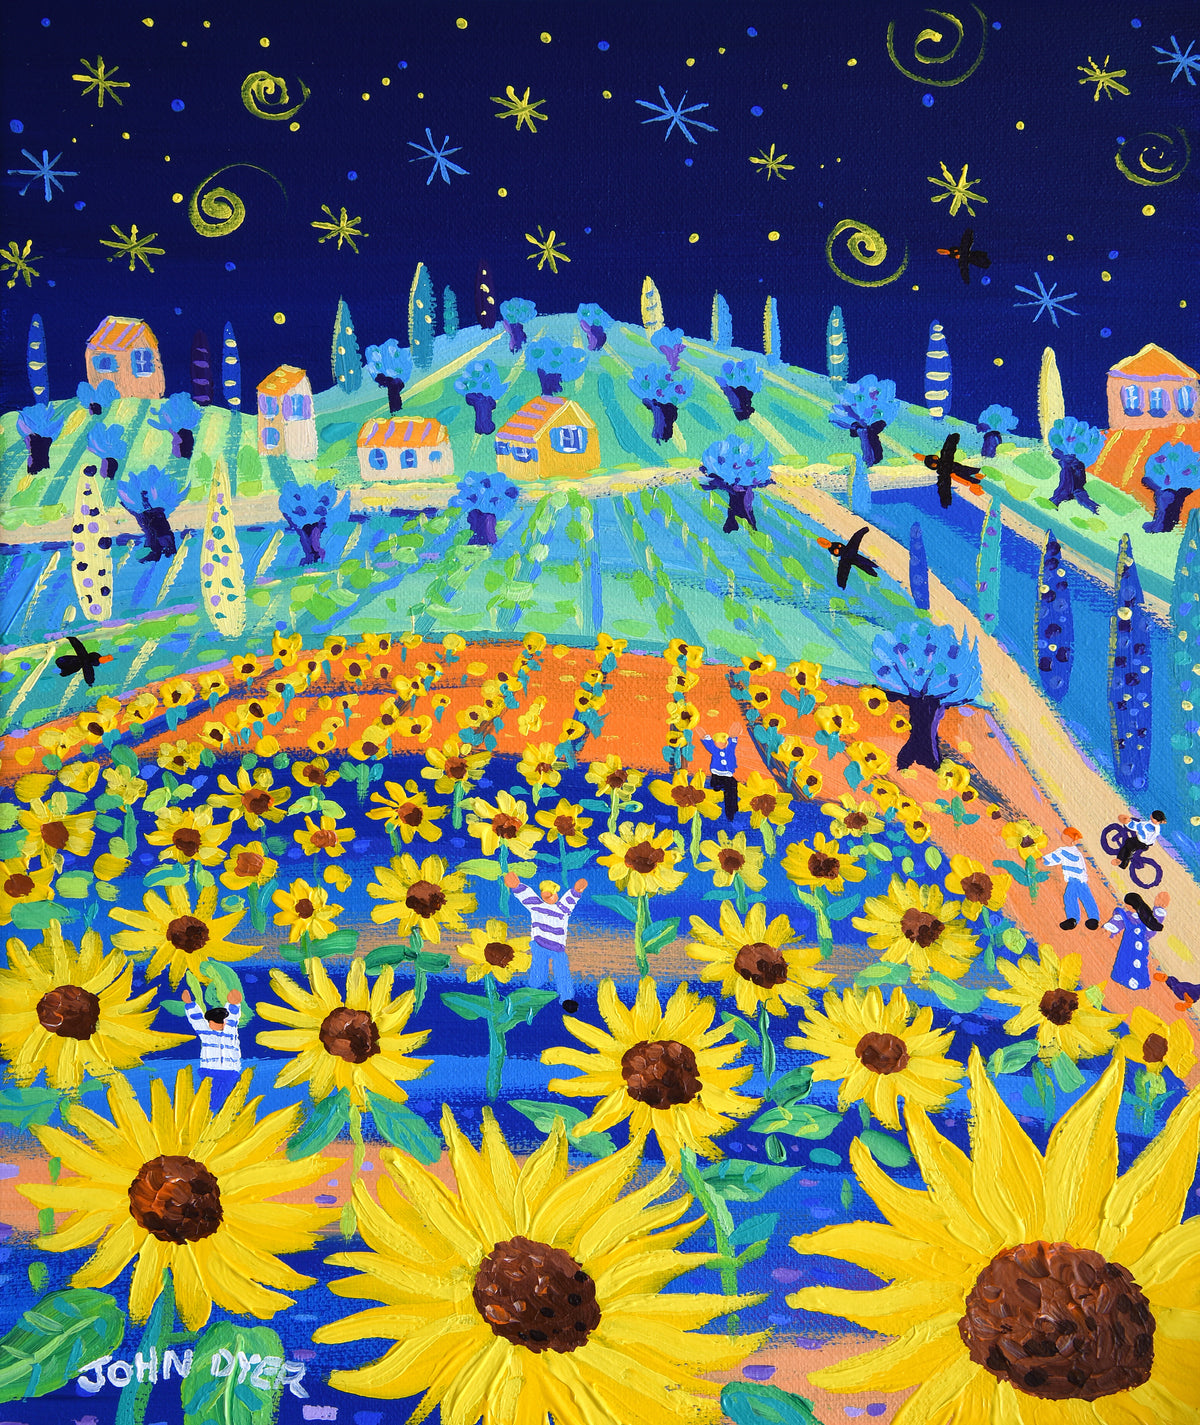 John Dyer Painting. Sunflowers and Stars. 12 x 10 inches acrylic on canvas